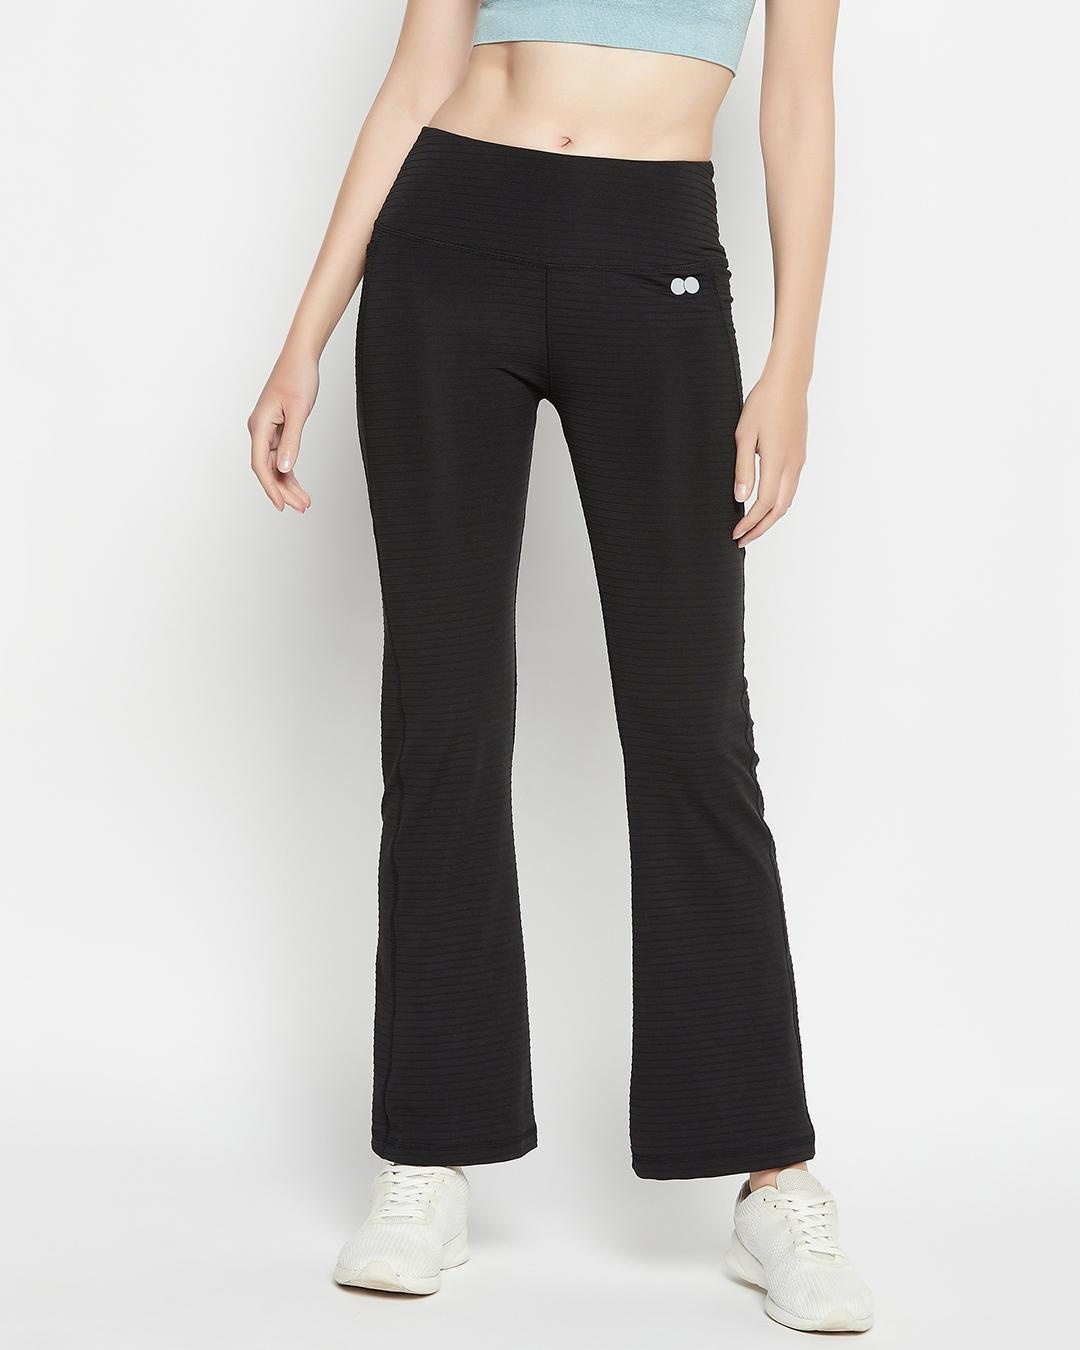 Buy Clovia Quick Dry Track pants  Black at Rs727 online  Activewear  online